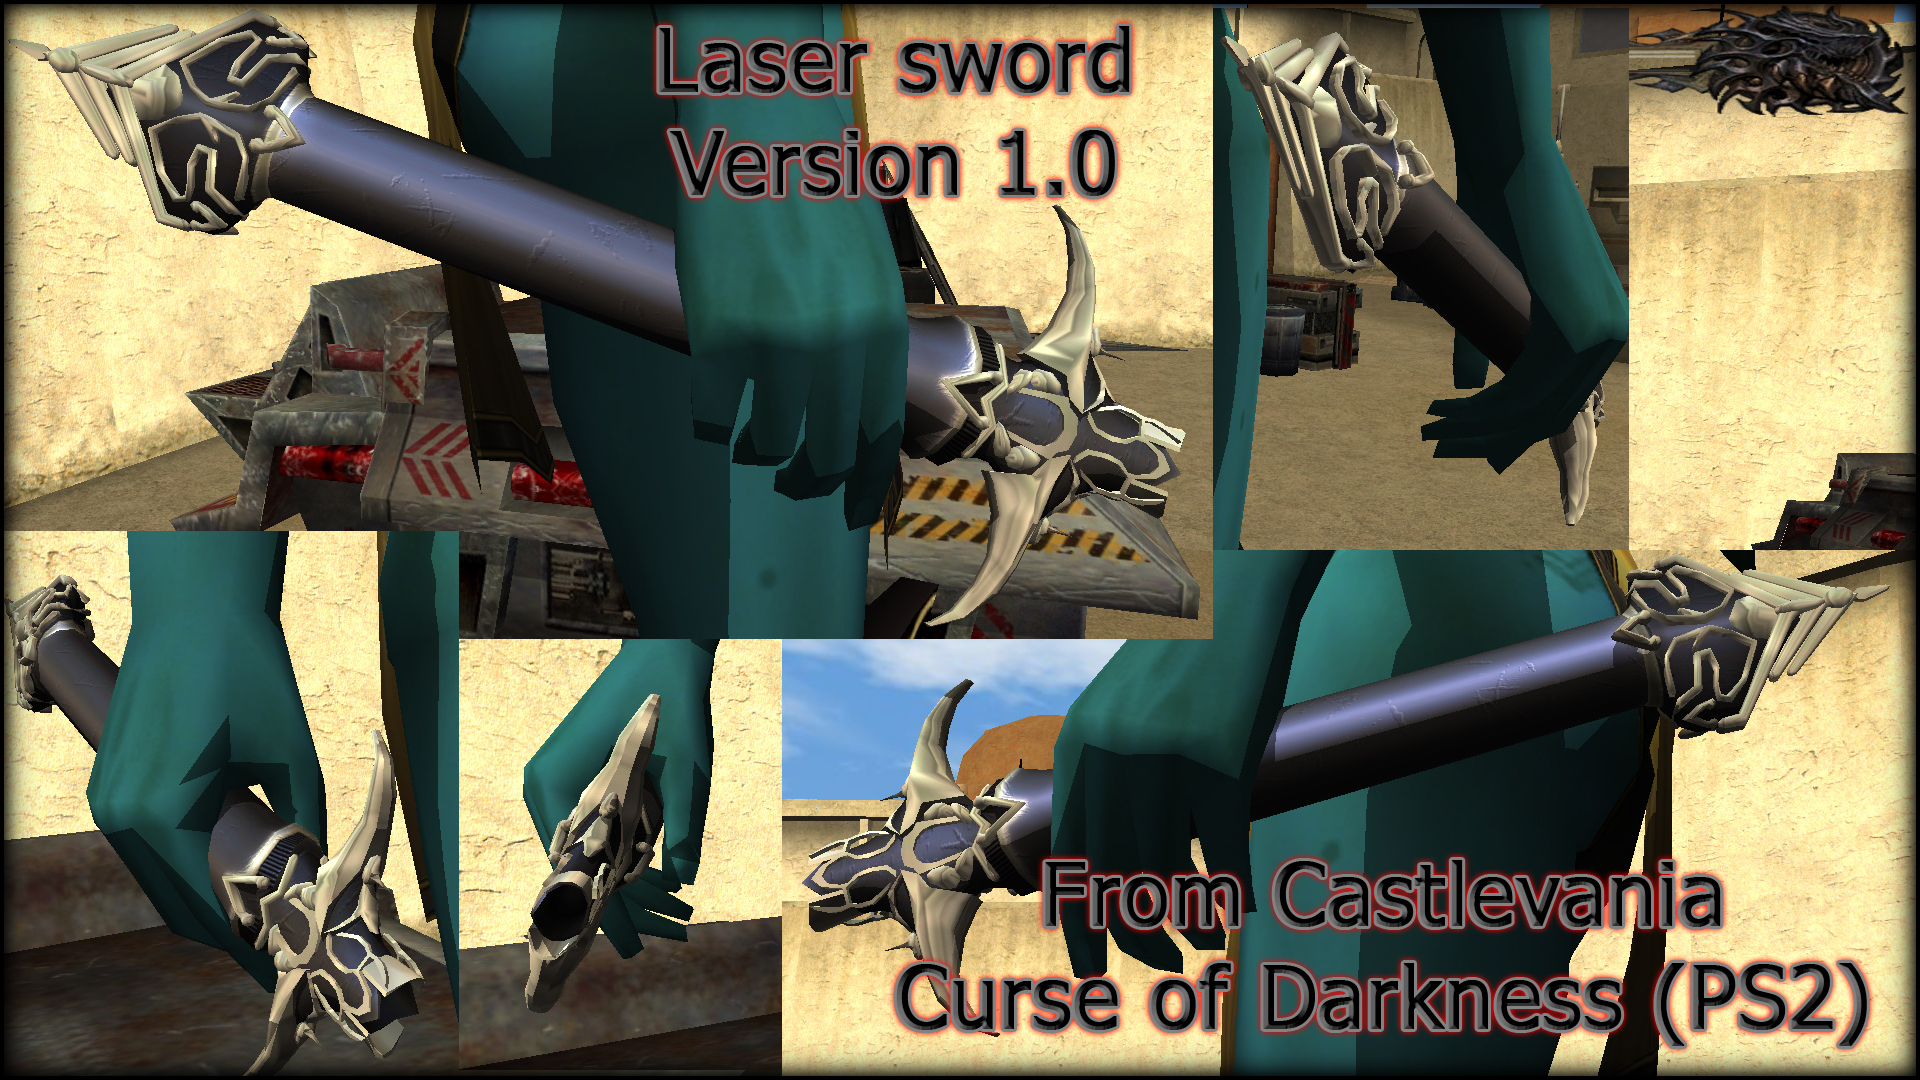 More information about "The Laser Sword (Castlevania:CoD weapon)"